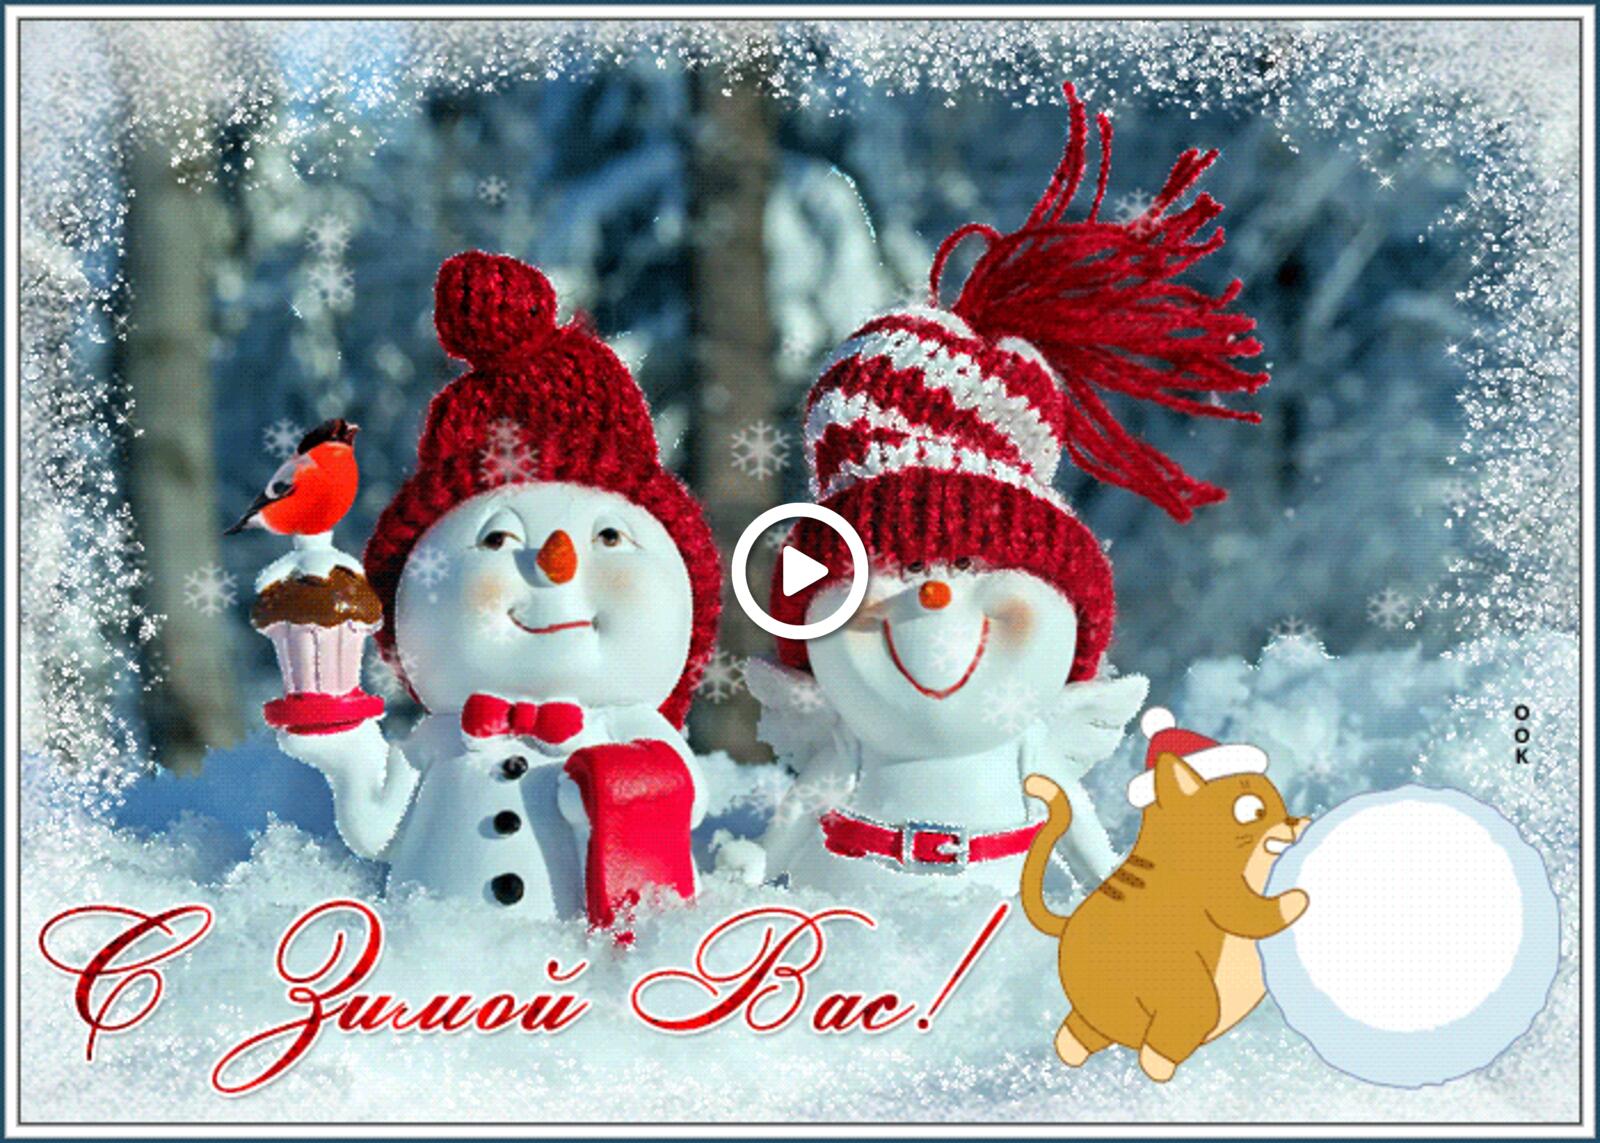 A postcard on the subject of with winter you holidays snowman for free